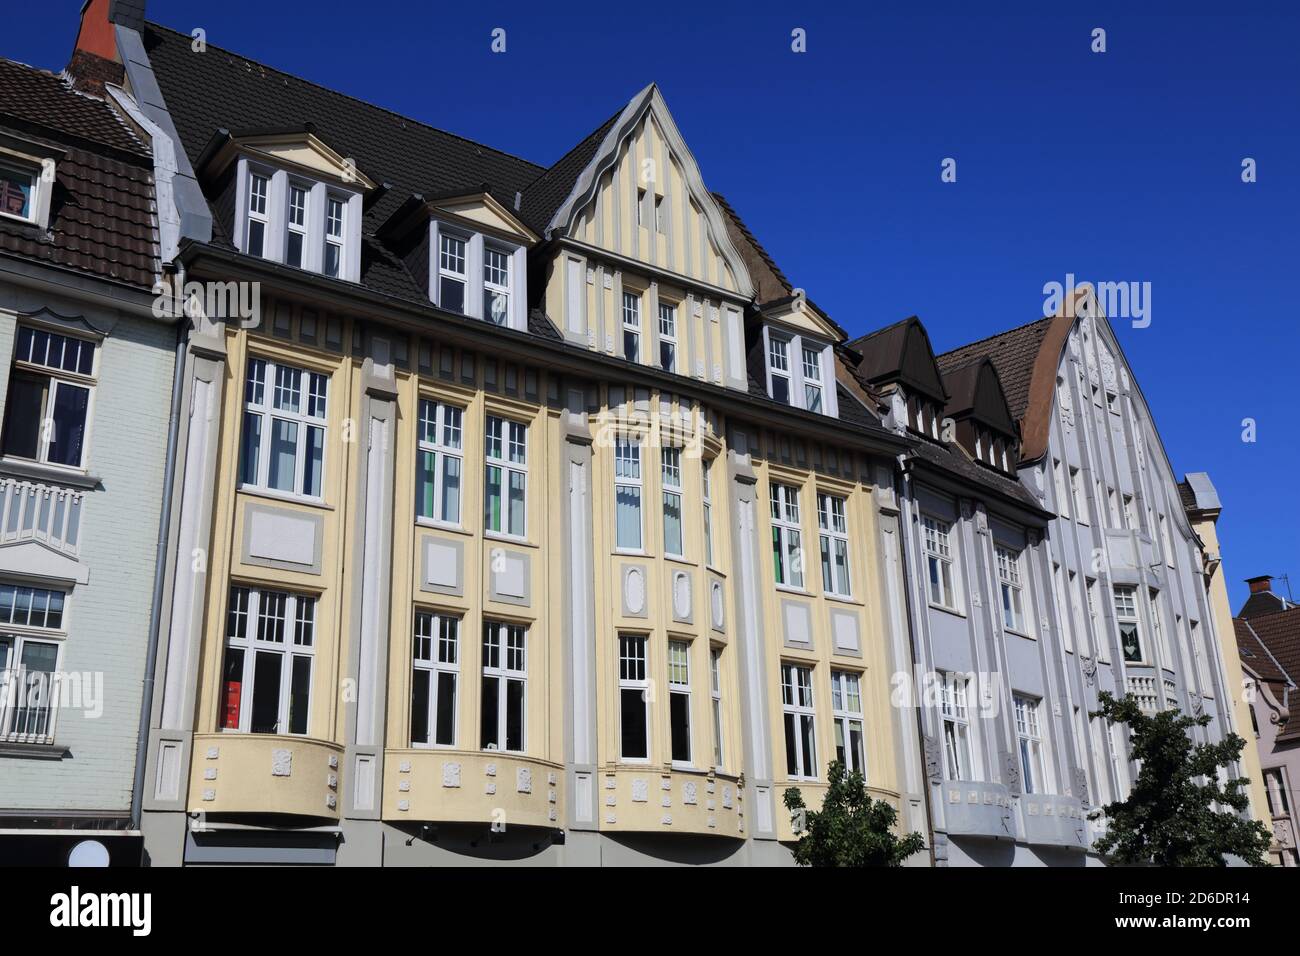 Bottrop city, Germany. Old town street view: Altmarkt square architecture. Stock Photo